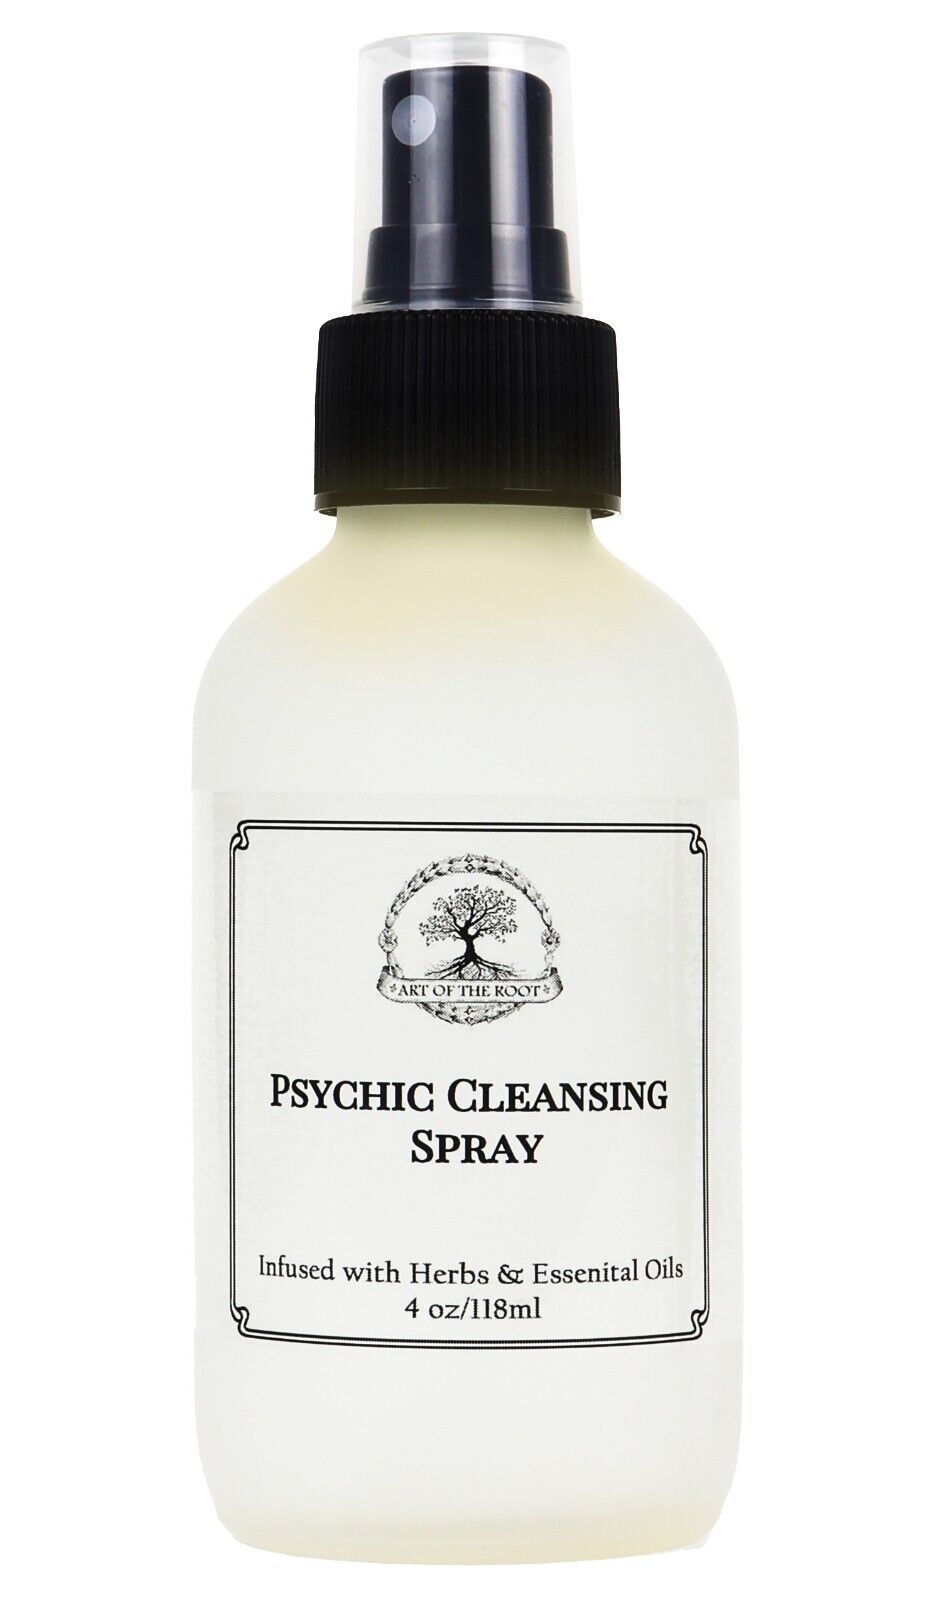 Psychic Cleansing Spray Purification & Negativity Hoodoo Voodoo Pagan Wicca  